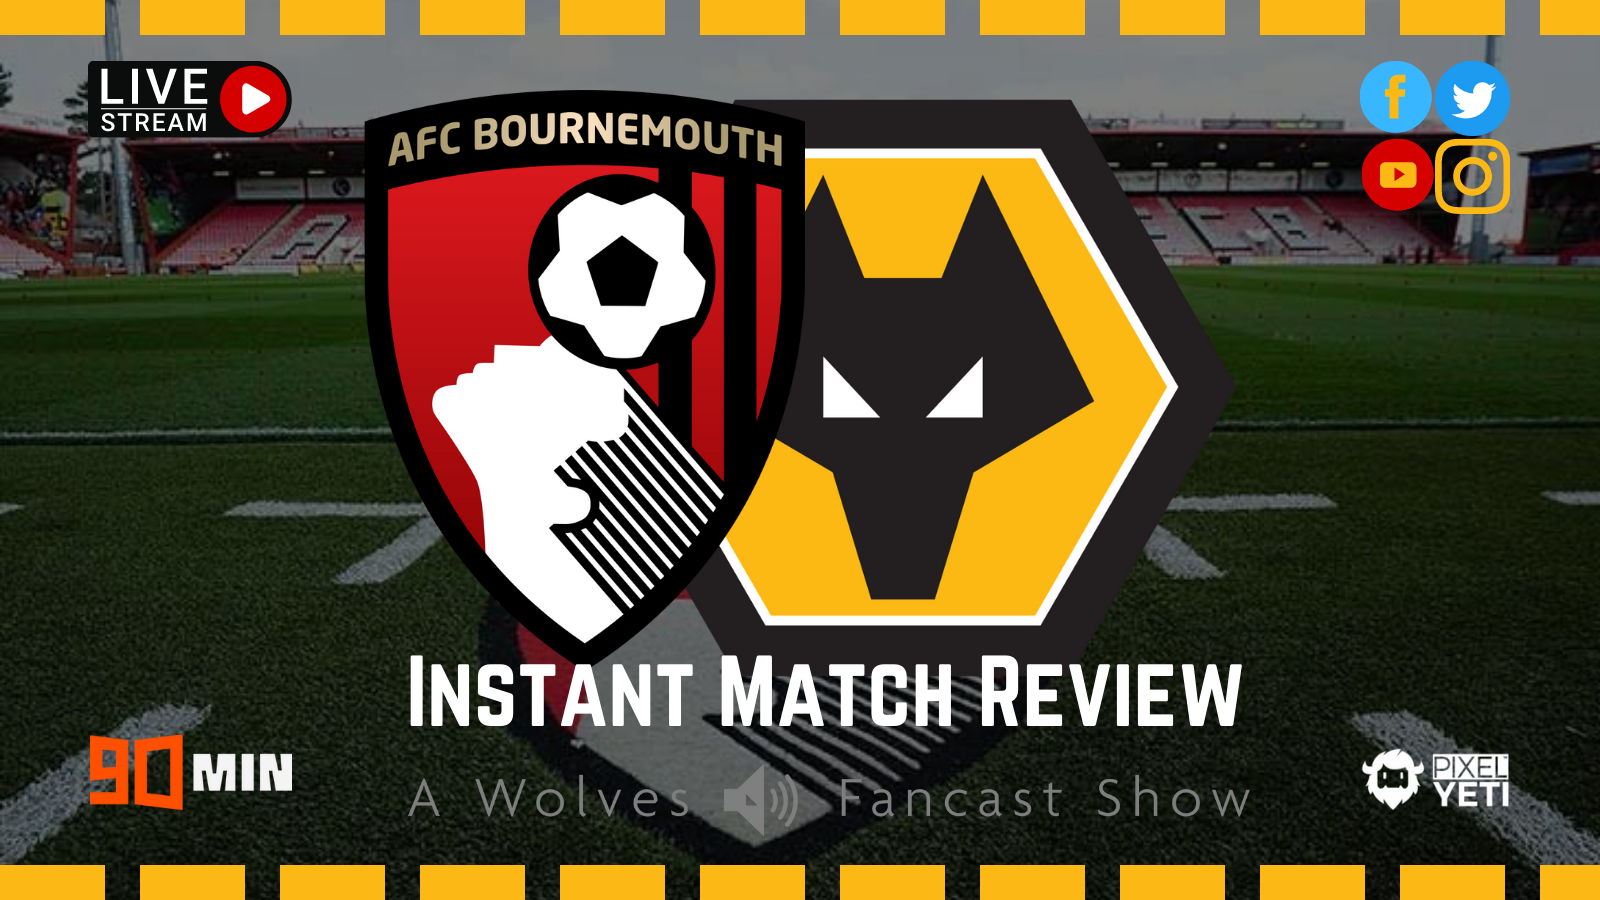 Bournemouth 0-0 Wolves Match Review, Is Bruno Lage, Glenn Hoddle 2.0?